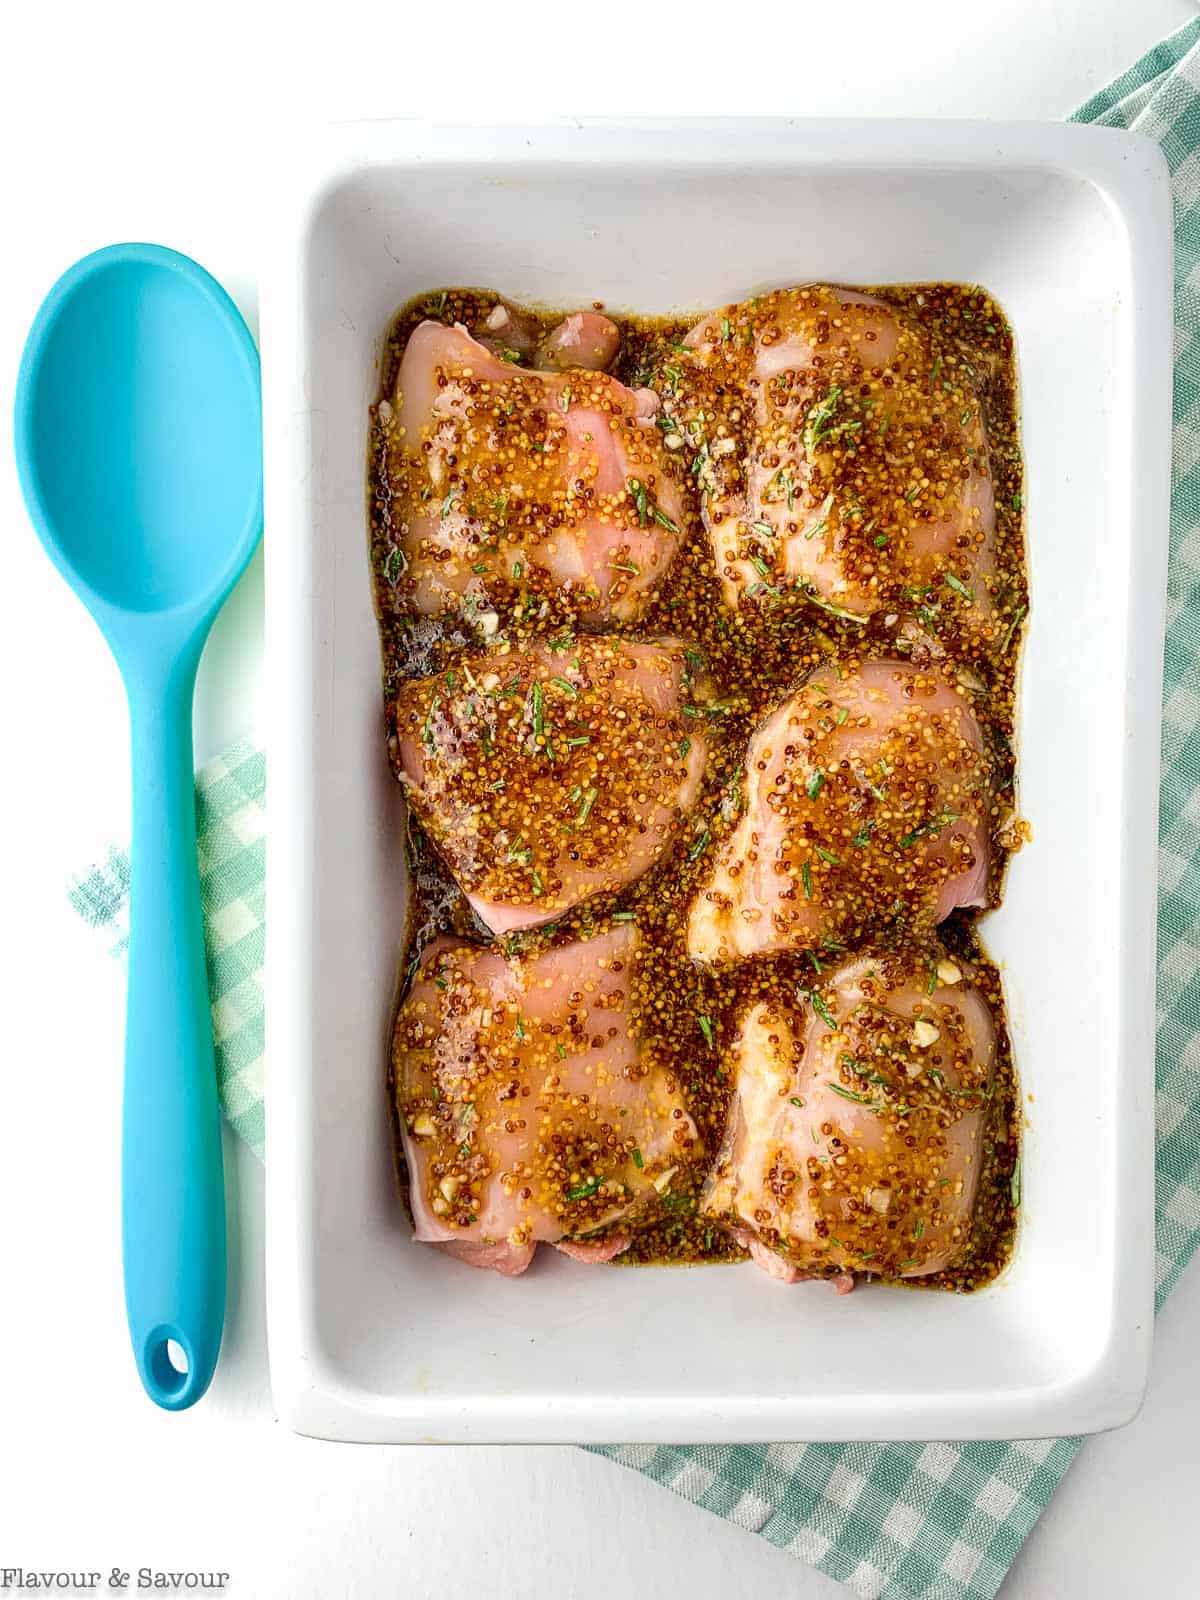 Maple Dijon chicken thighs in a baking dish covered in sauce.